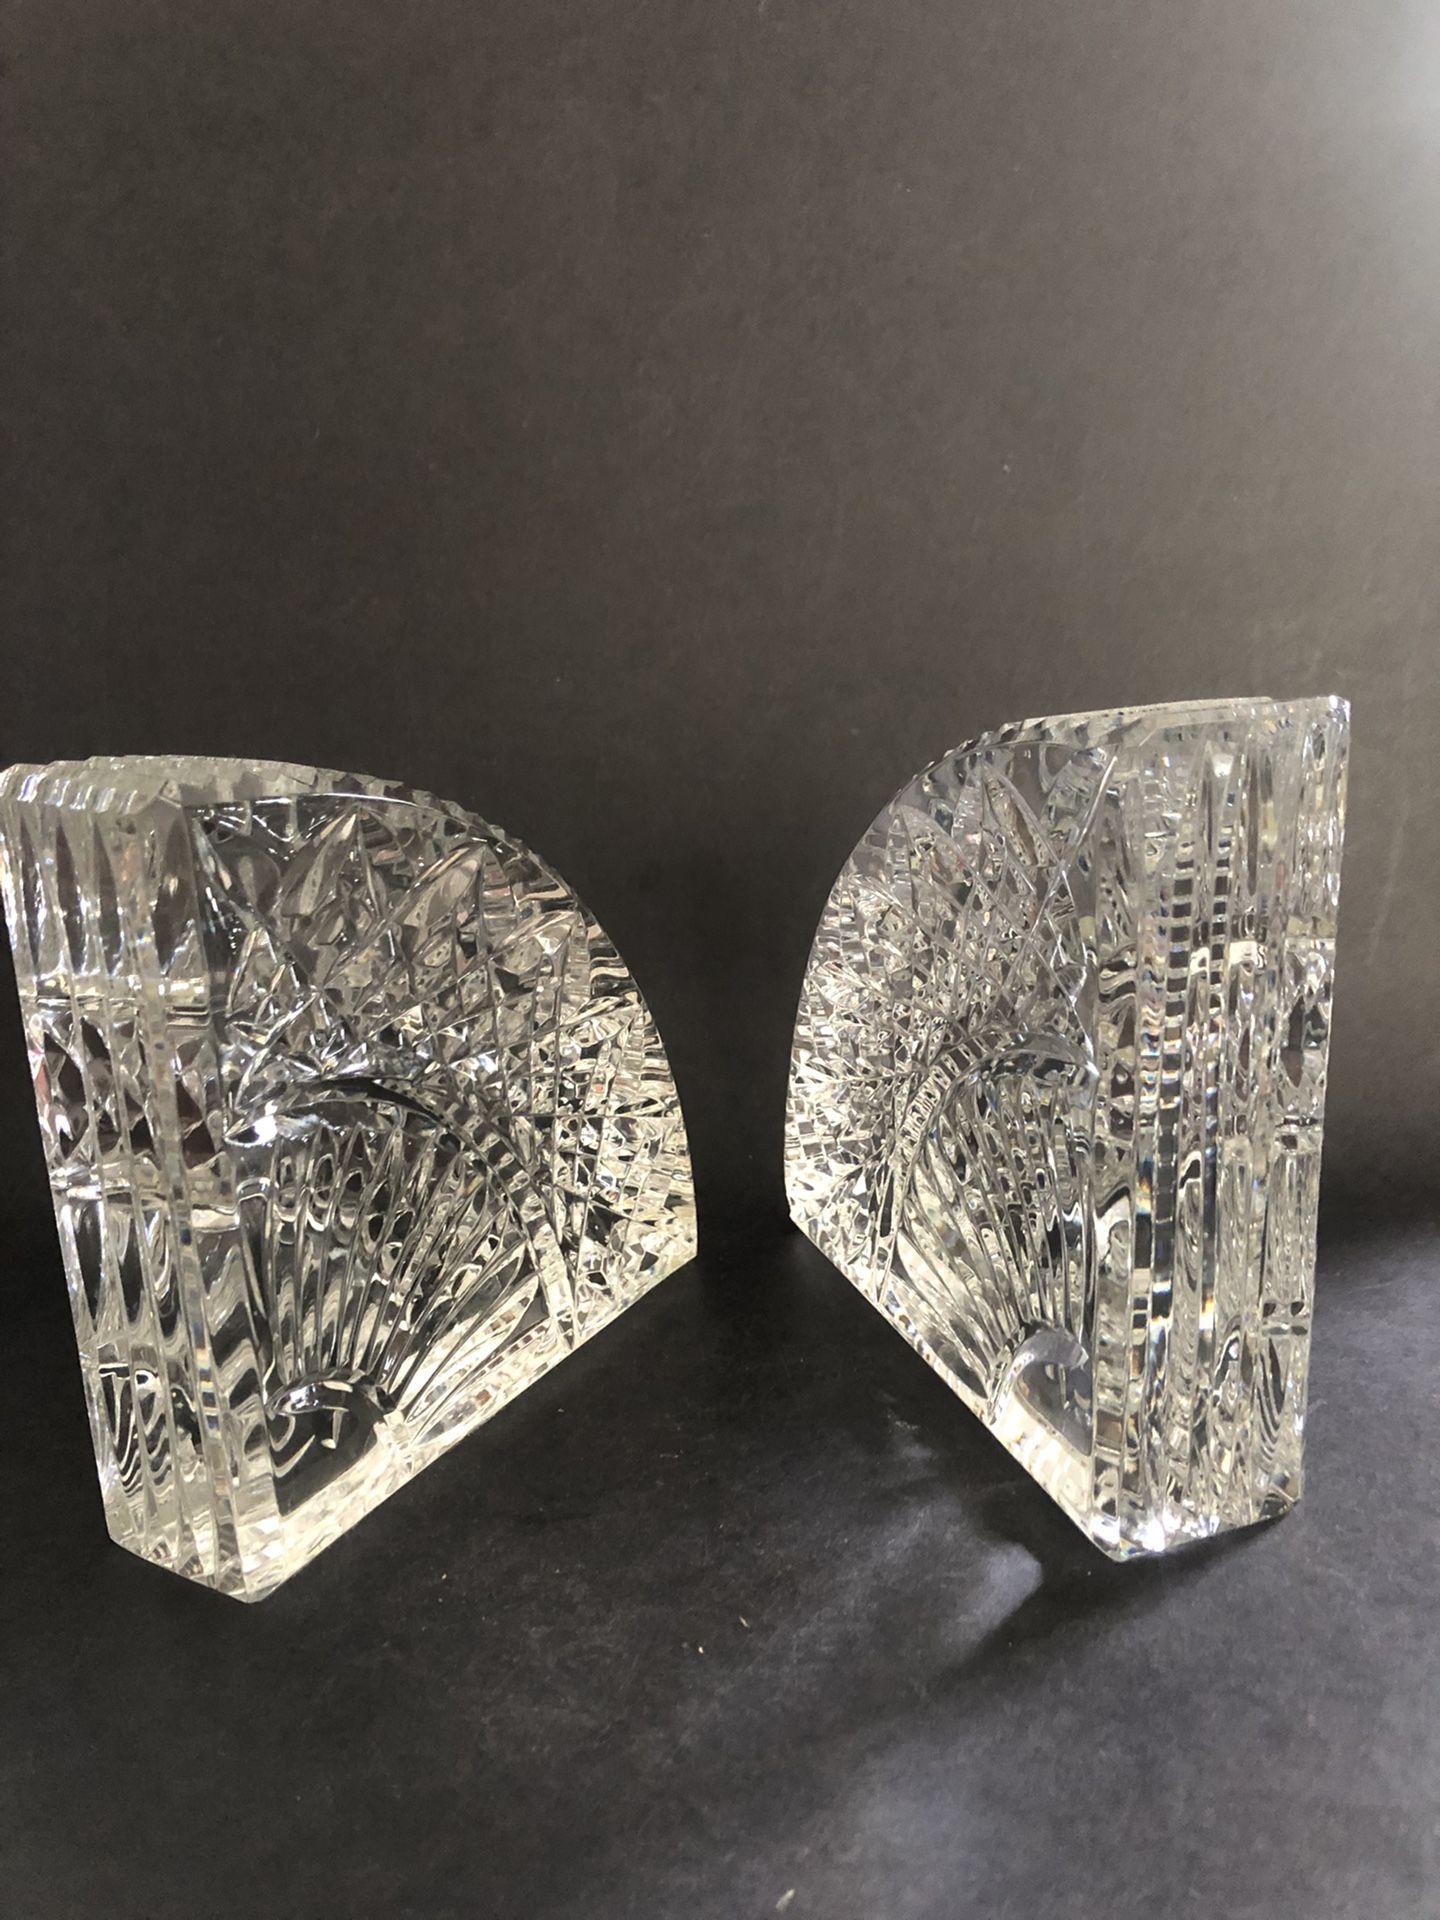 Waterford Lismore Bookends, Waterford Quadrant Bookends, Waterford Crystal Bookends, Waterford Quadrant Book Ends